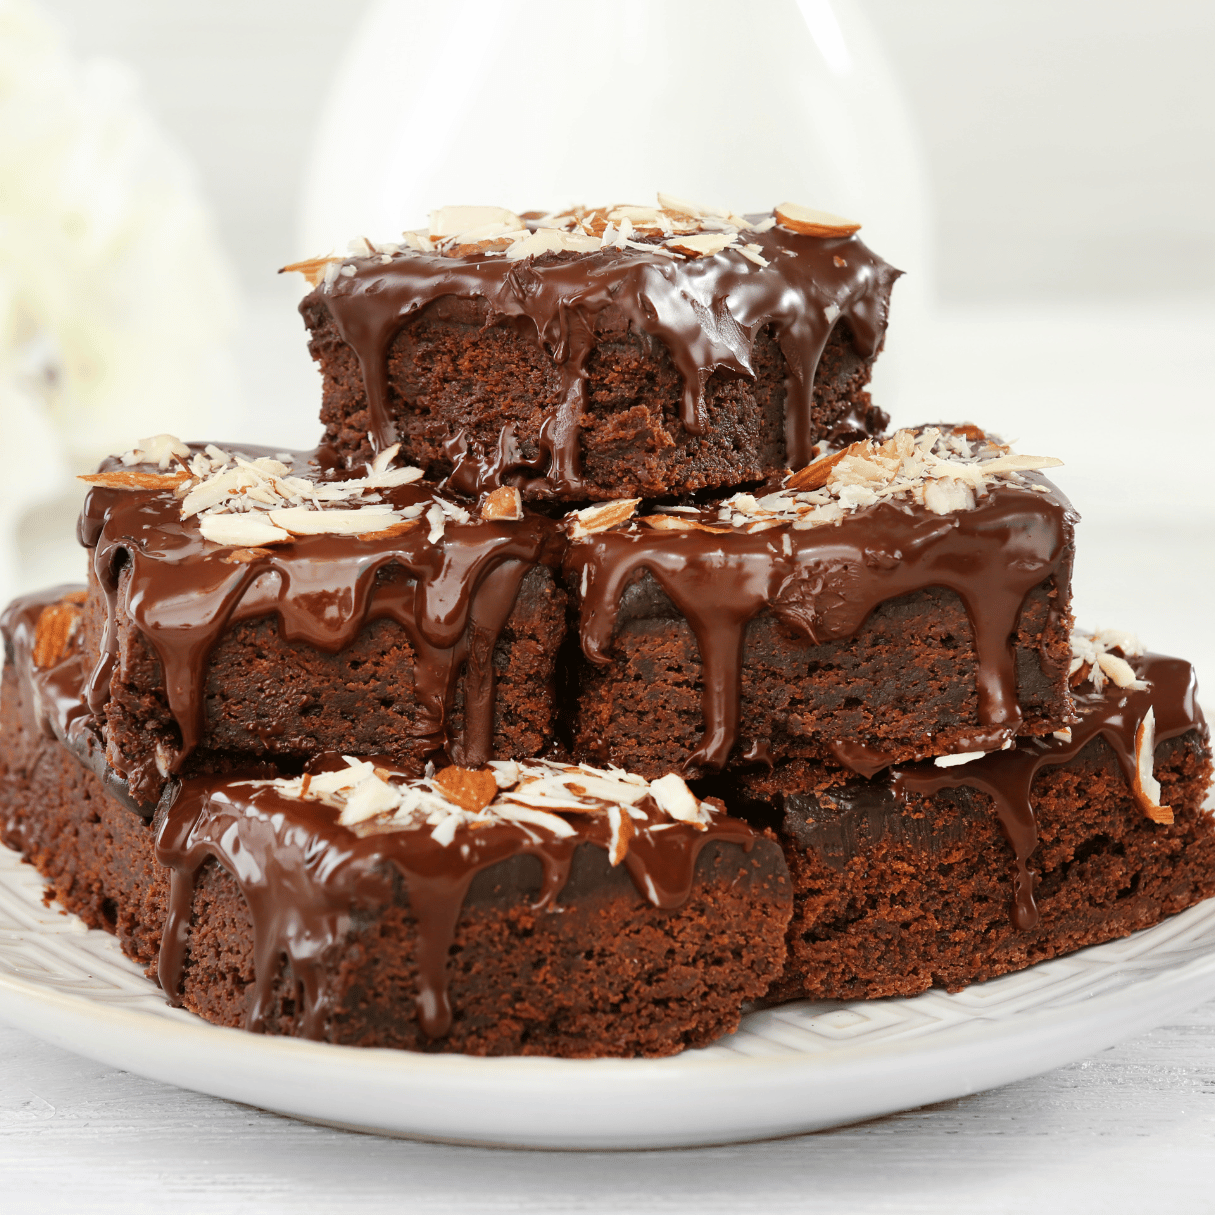 Decadent chocolate brownies with a hint of cannabis, sitting on a white plate with a drizzle of chocolate ganache and a sprinkling of powdered sugar.